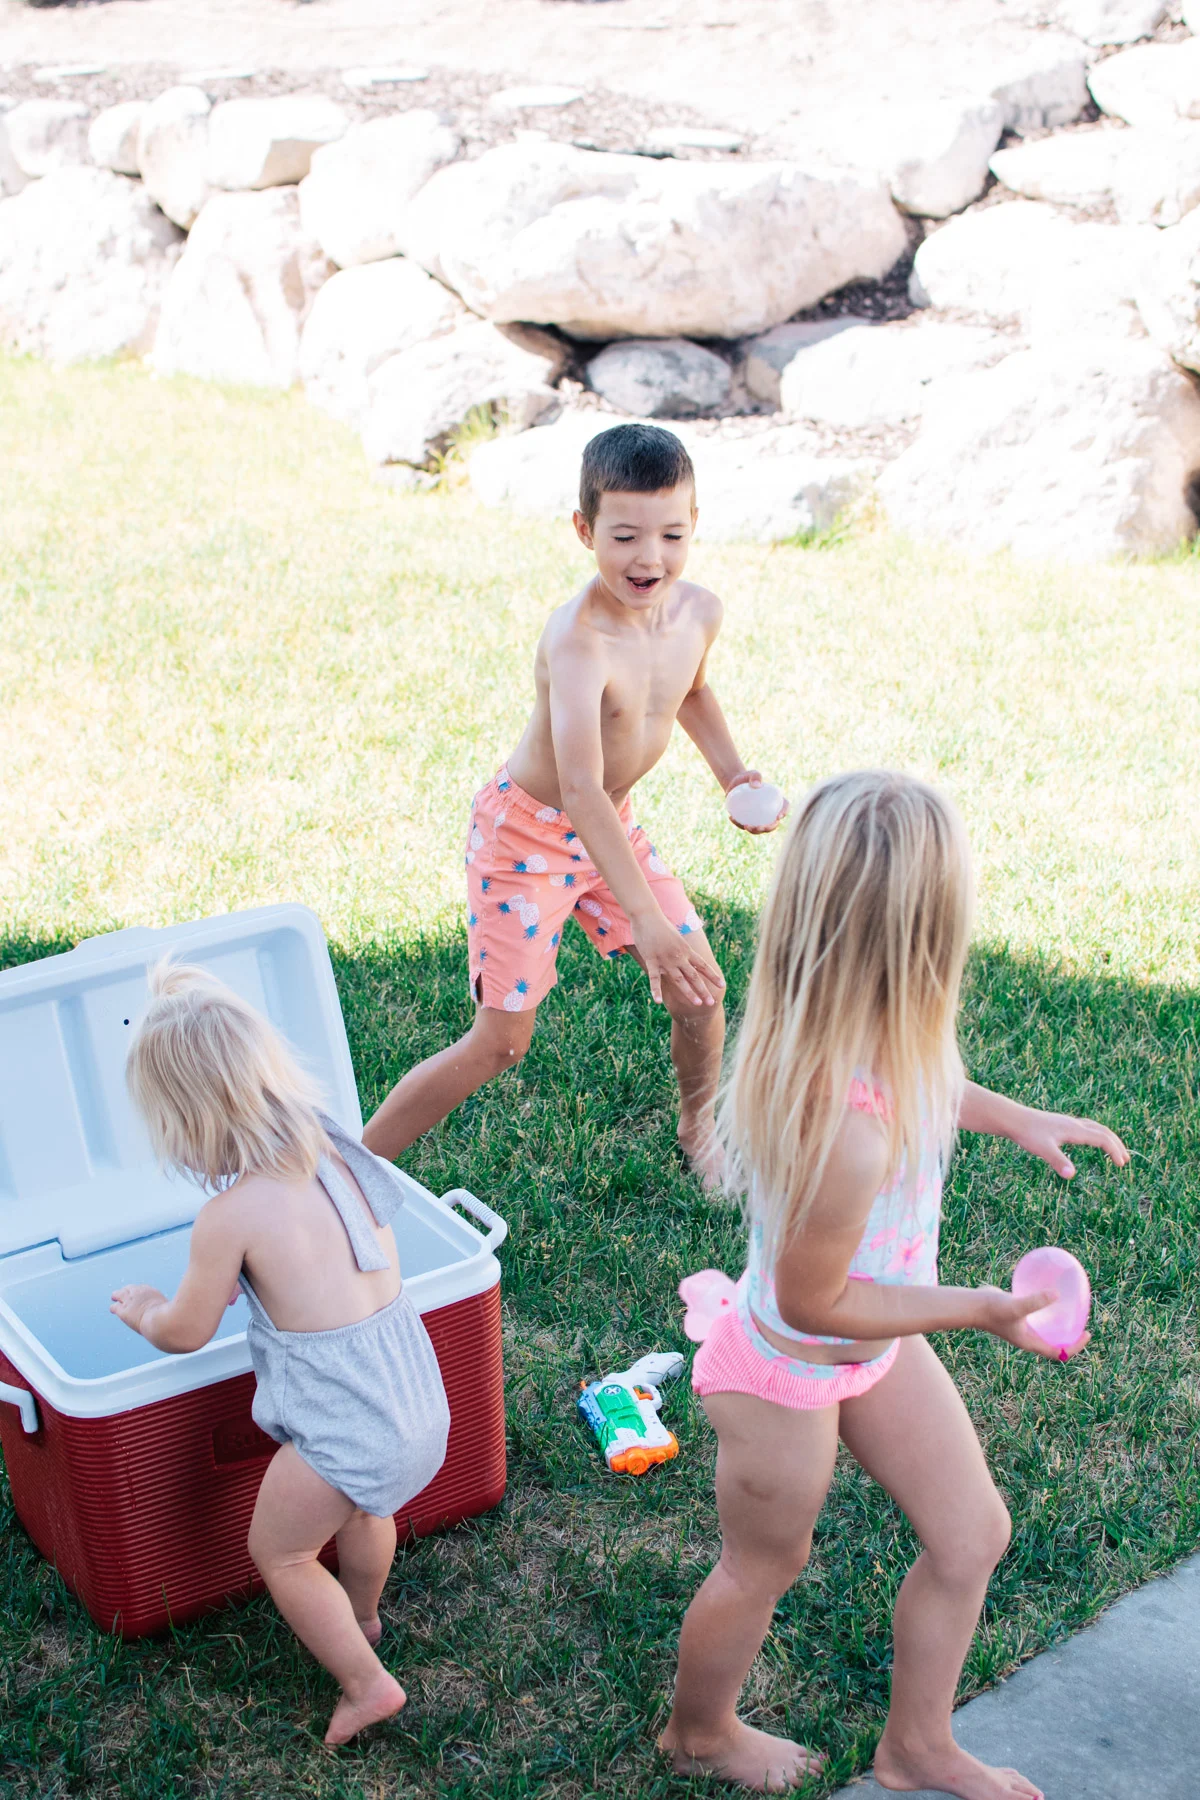 Boy throws water balloon at young girl while baby gets a balloon out of red cooler.